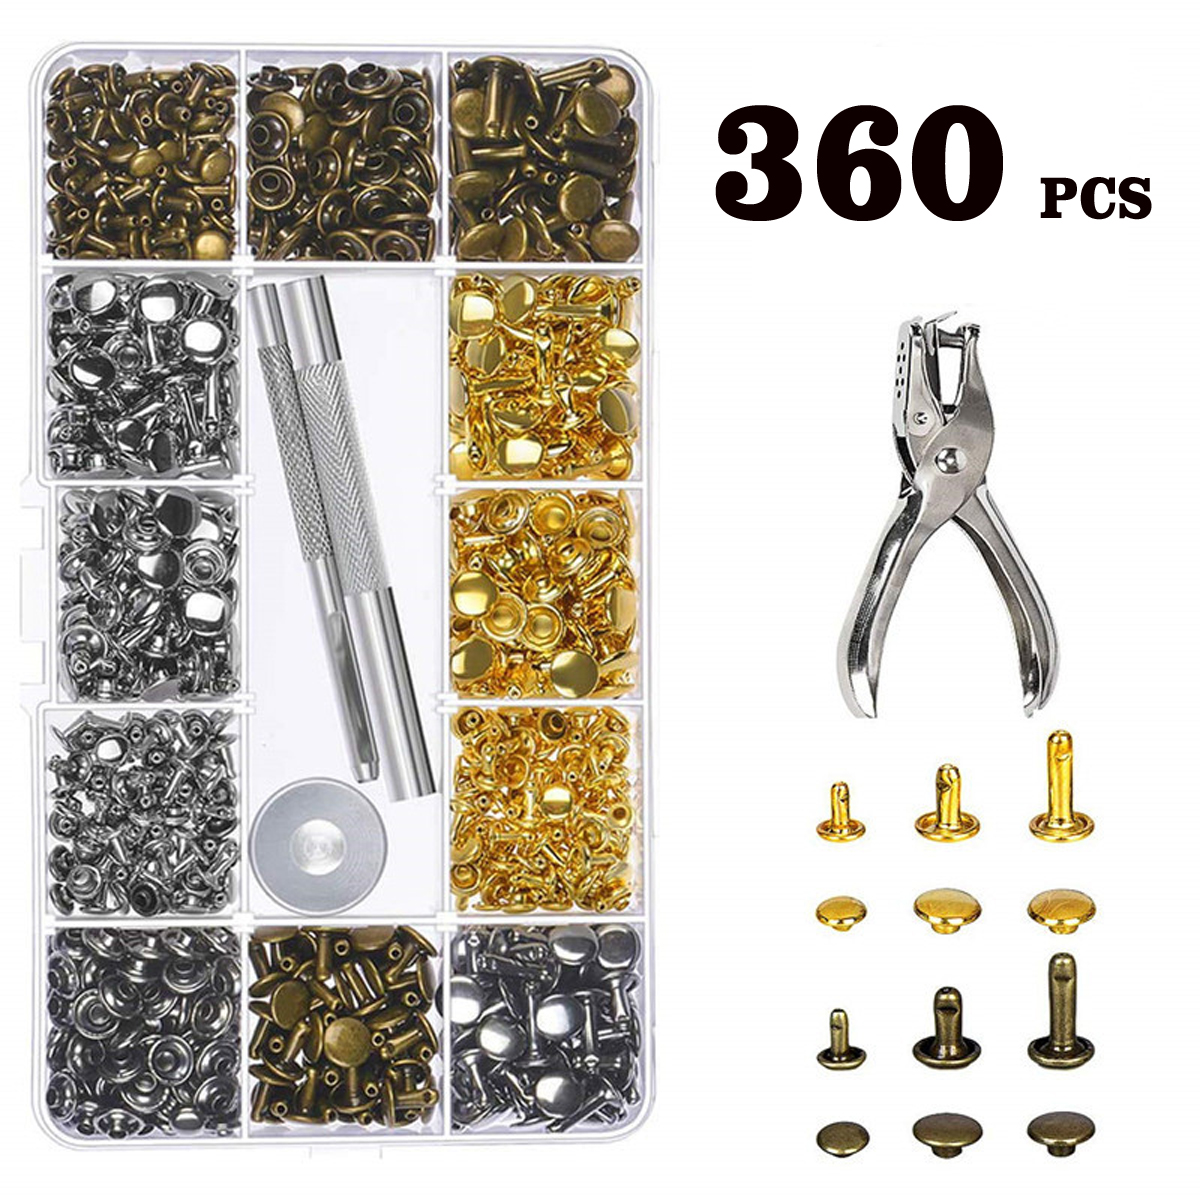 360Pcs-Leather-Rivets-Double-Cap-Rivets-Metal-Fixing-Tool-With-Punch-Pliers-Kit-Craft-Snap-Fastener--1780048-1